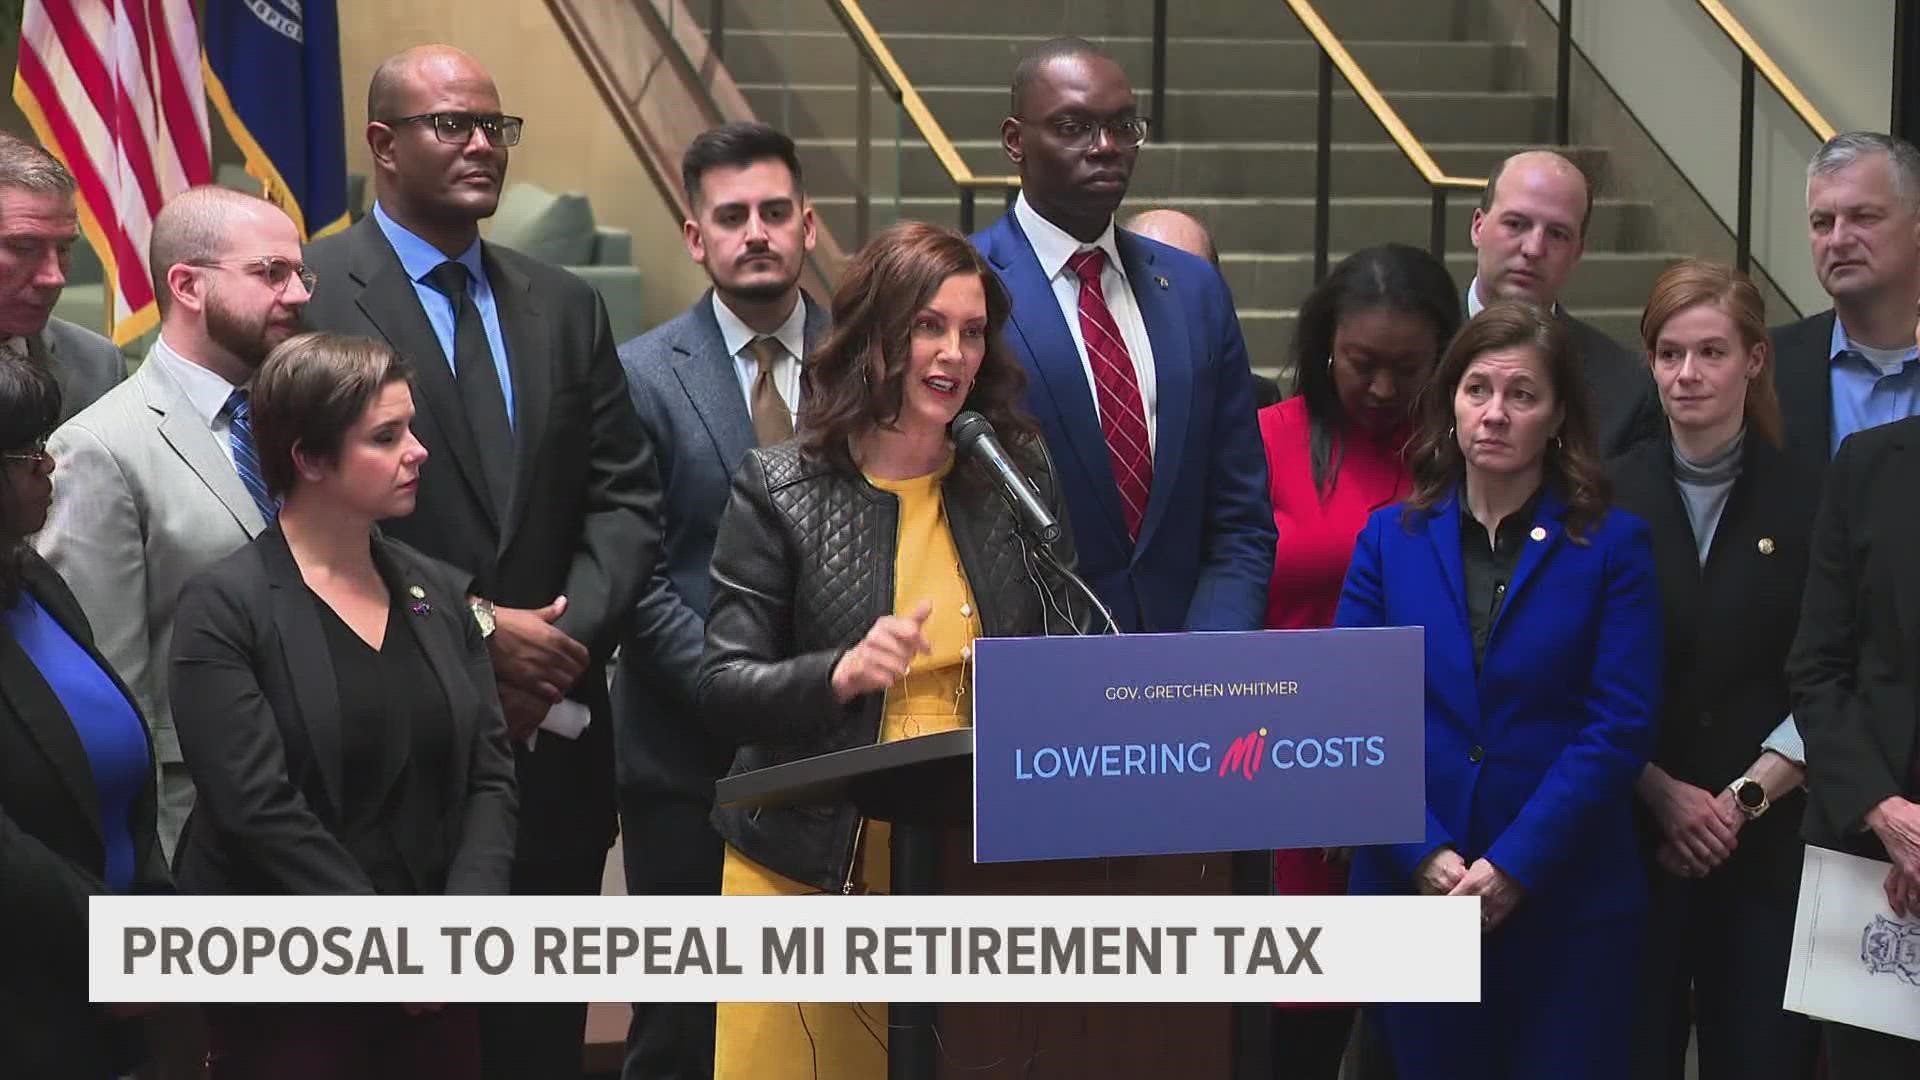 Democratic lawmakers in Lansing today announced their first set of bills aimed at, among other things, repealing the state's retirement tax.